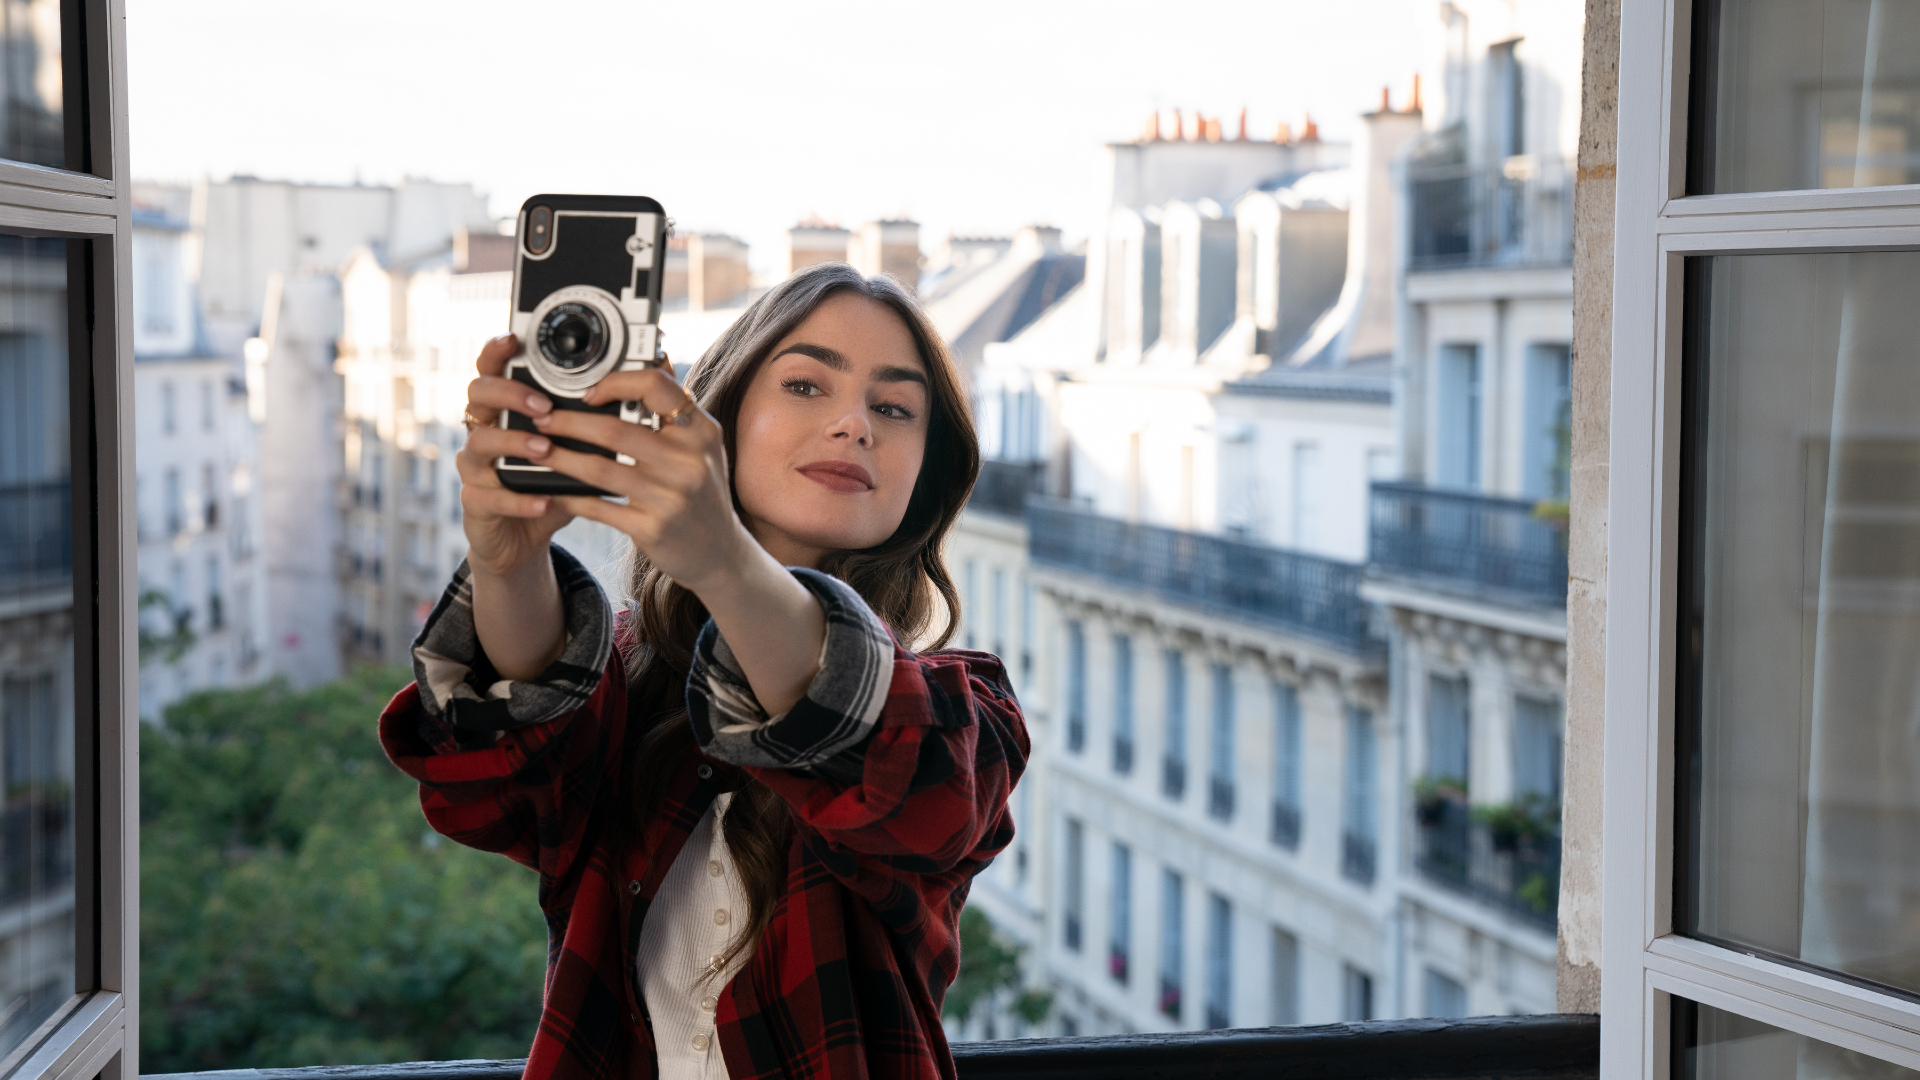 Emily in Paris holding an iPhone taking a selfie